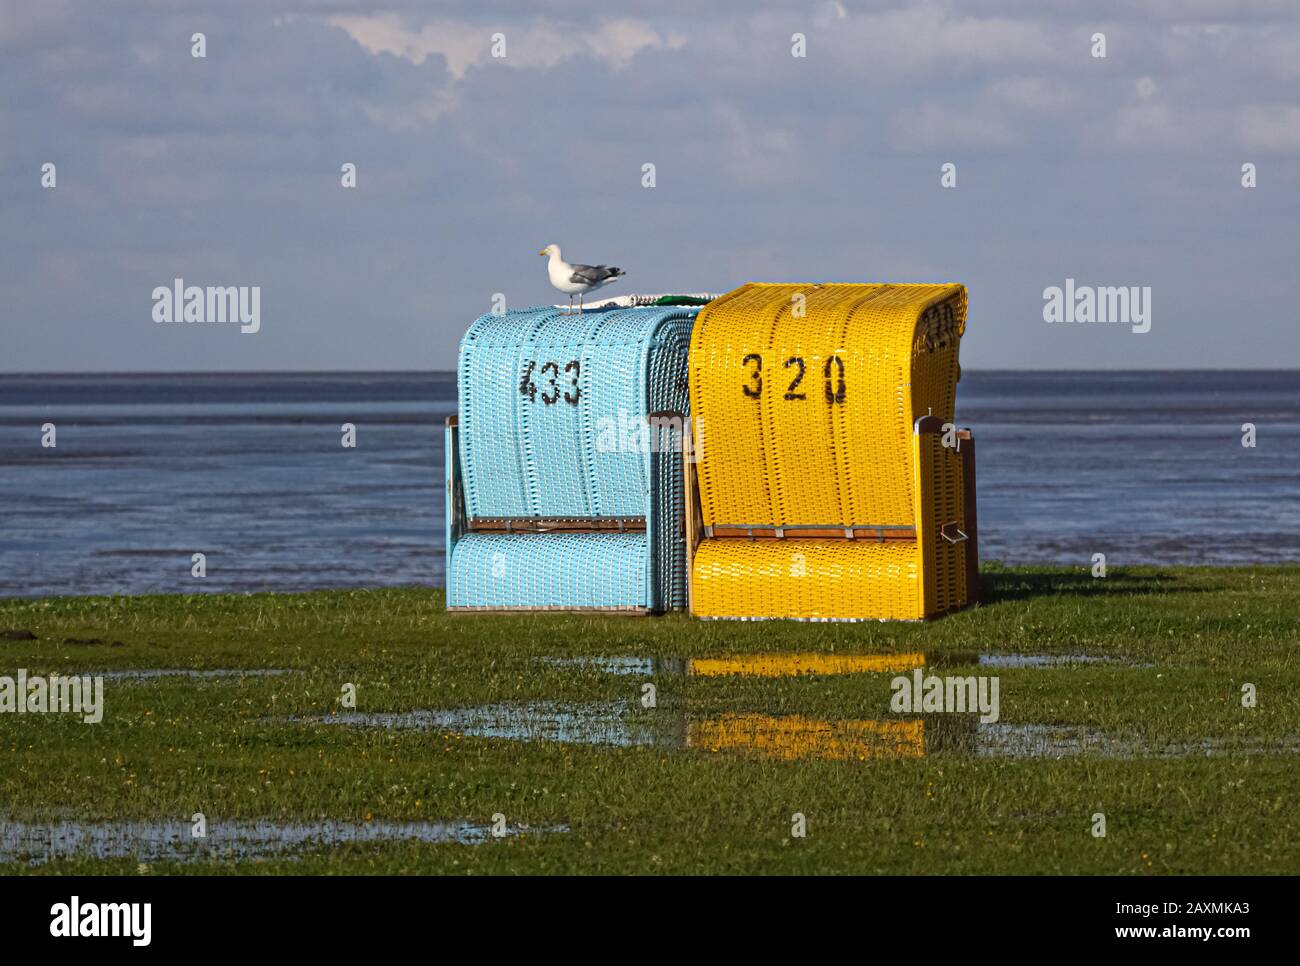 After the rain, the sun comes - the weather changes quickly on the North Sea. Stock Photo